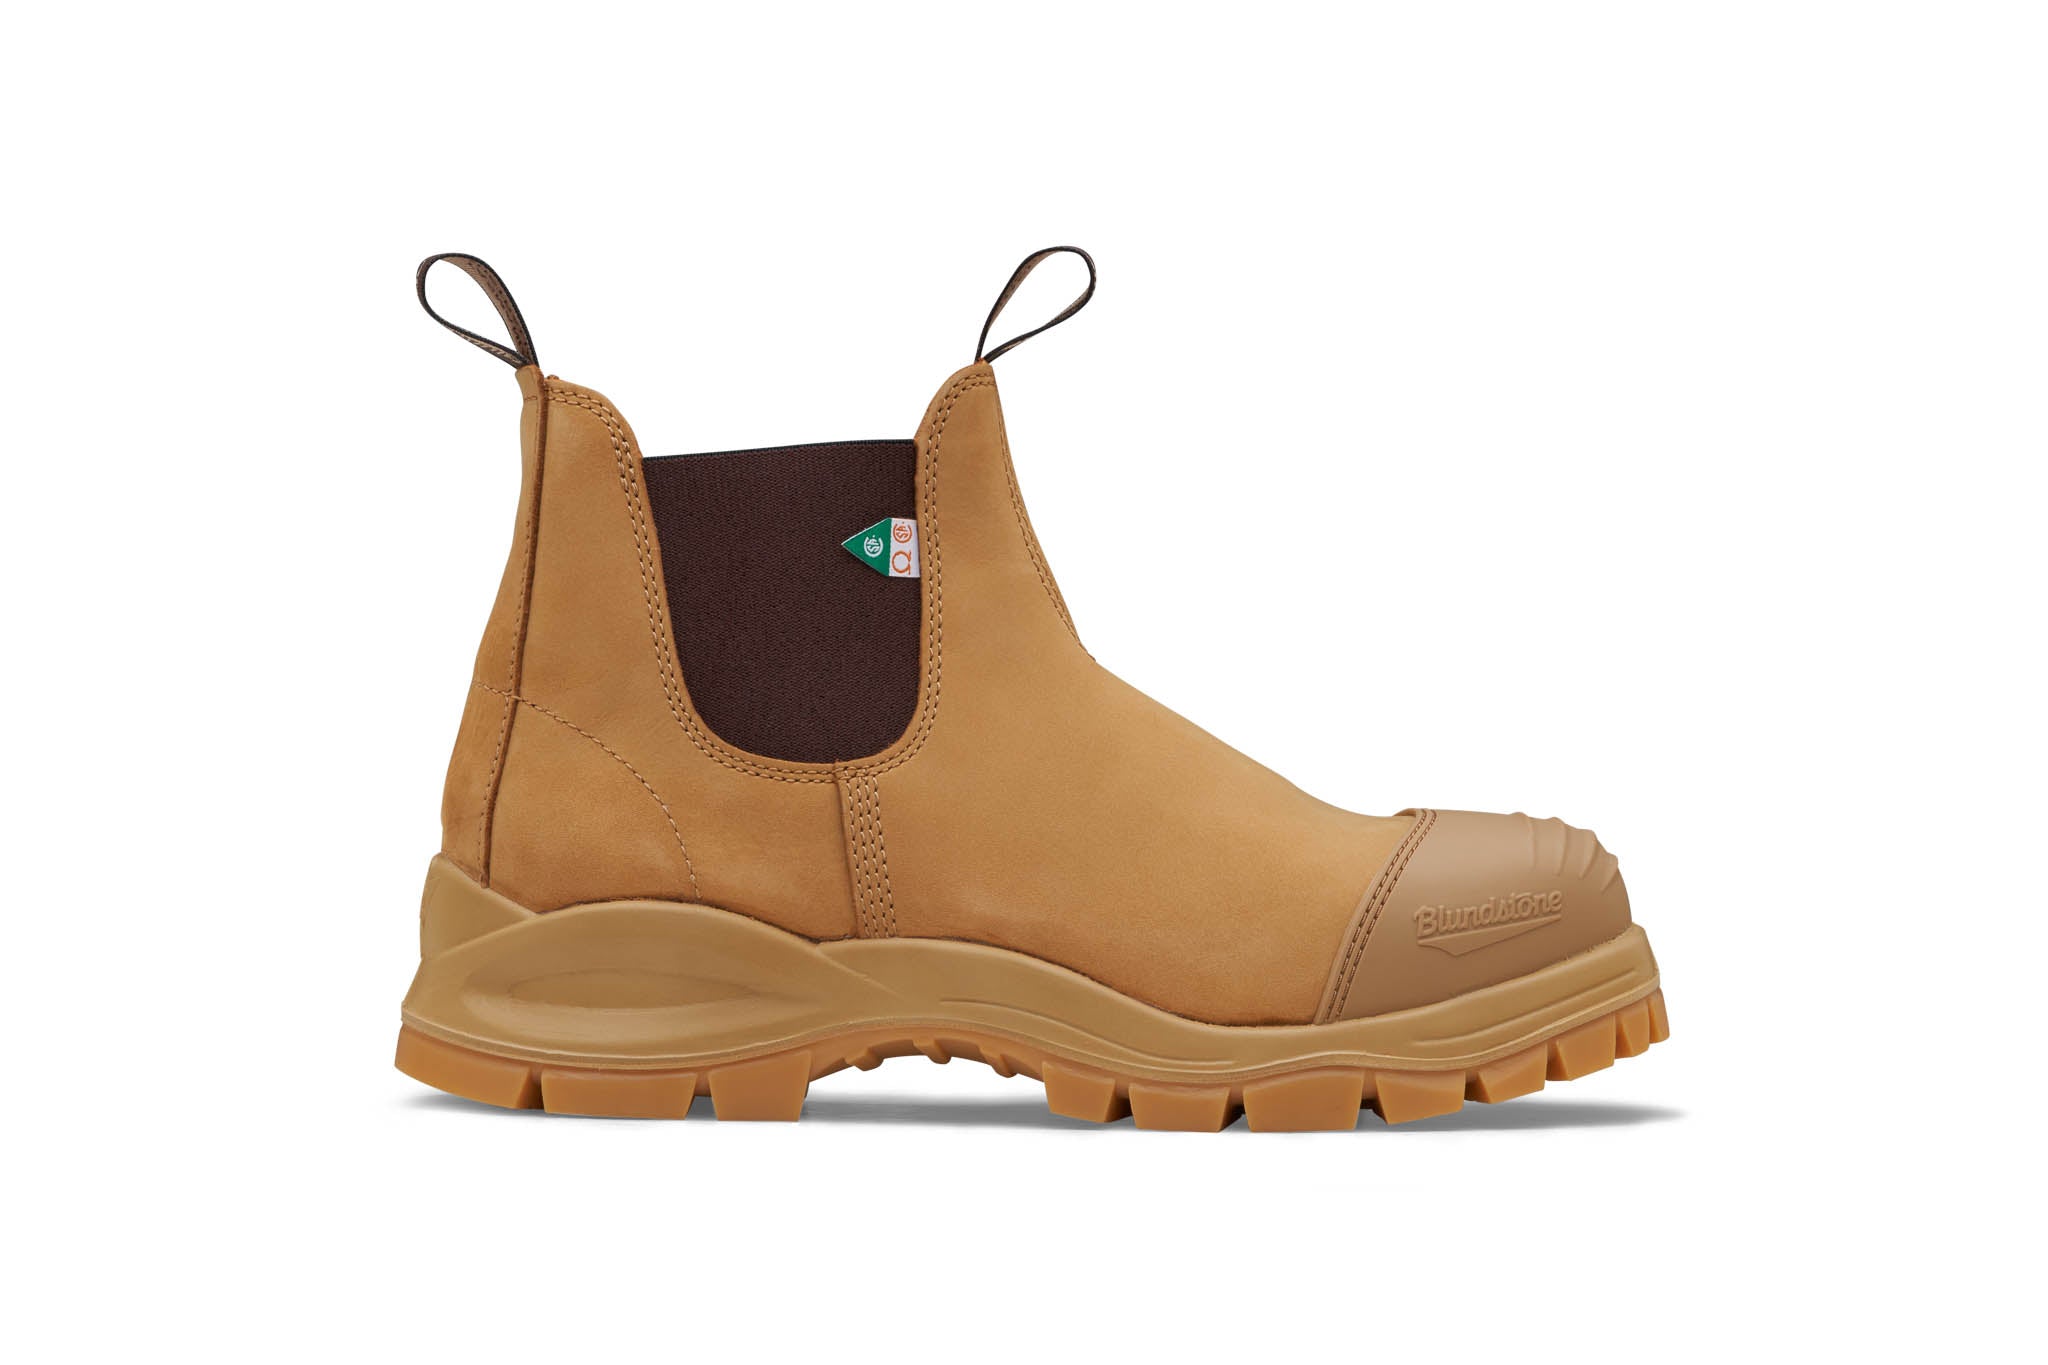 Blundstone XFR CSA Wheat Safety Boot 960